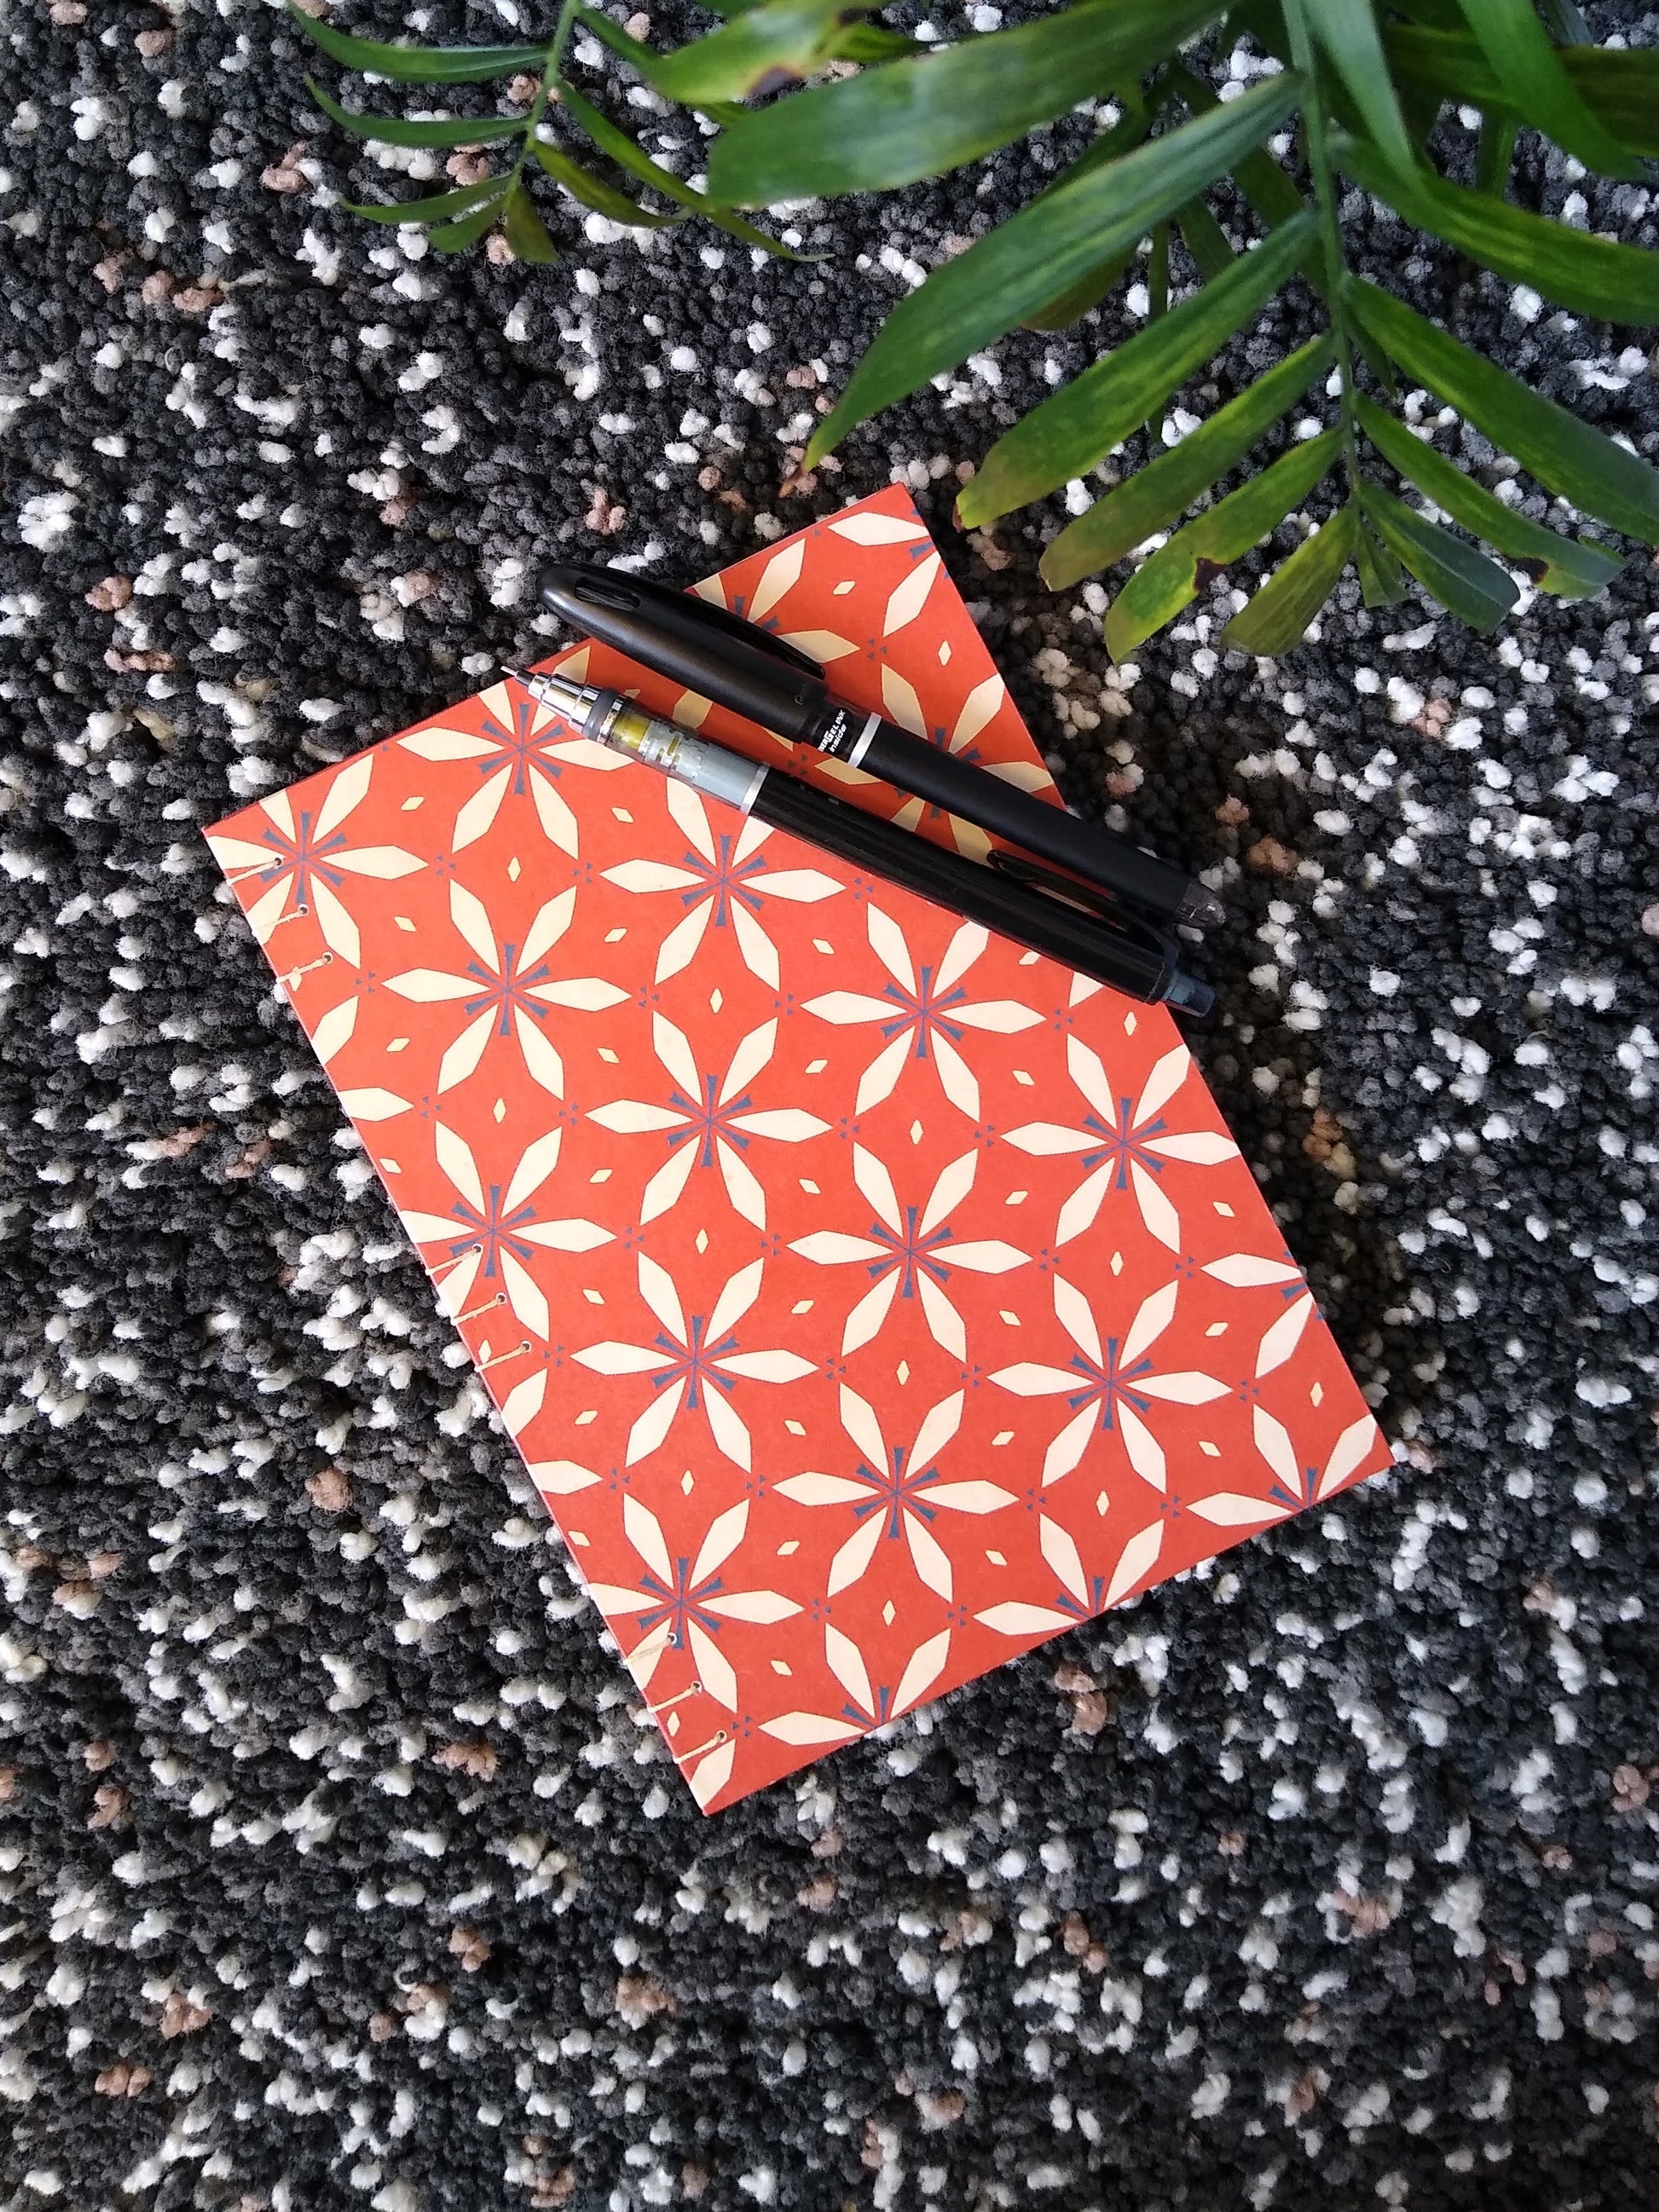 A handmade journal laying on a black shag carpet beside a potted plant, and with a black pen and mechanical pencil on top. The cover of the journal has a red and cream geometric floral design on it.